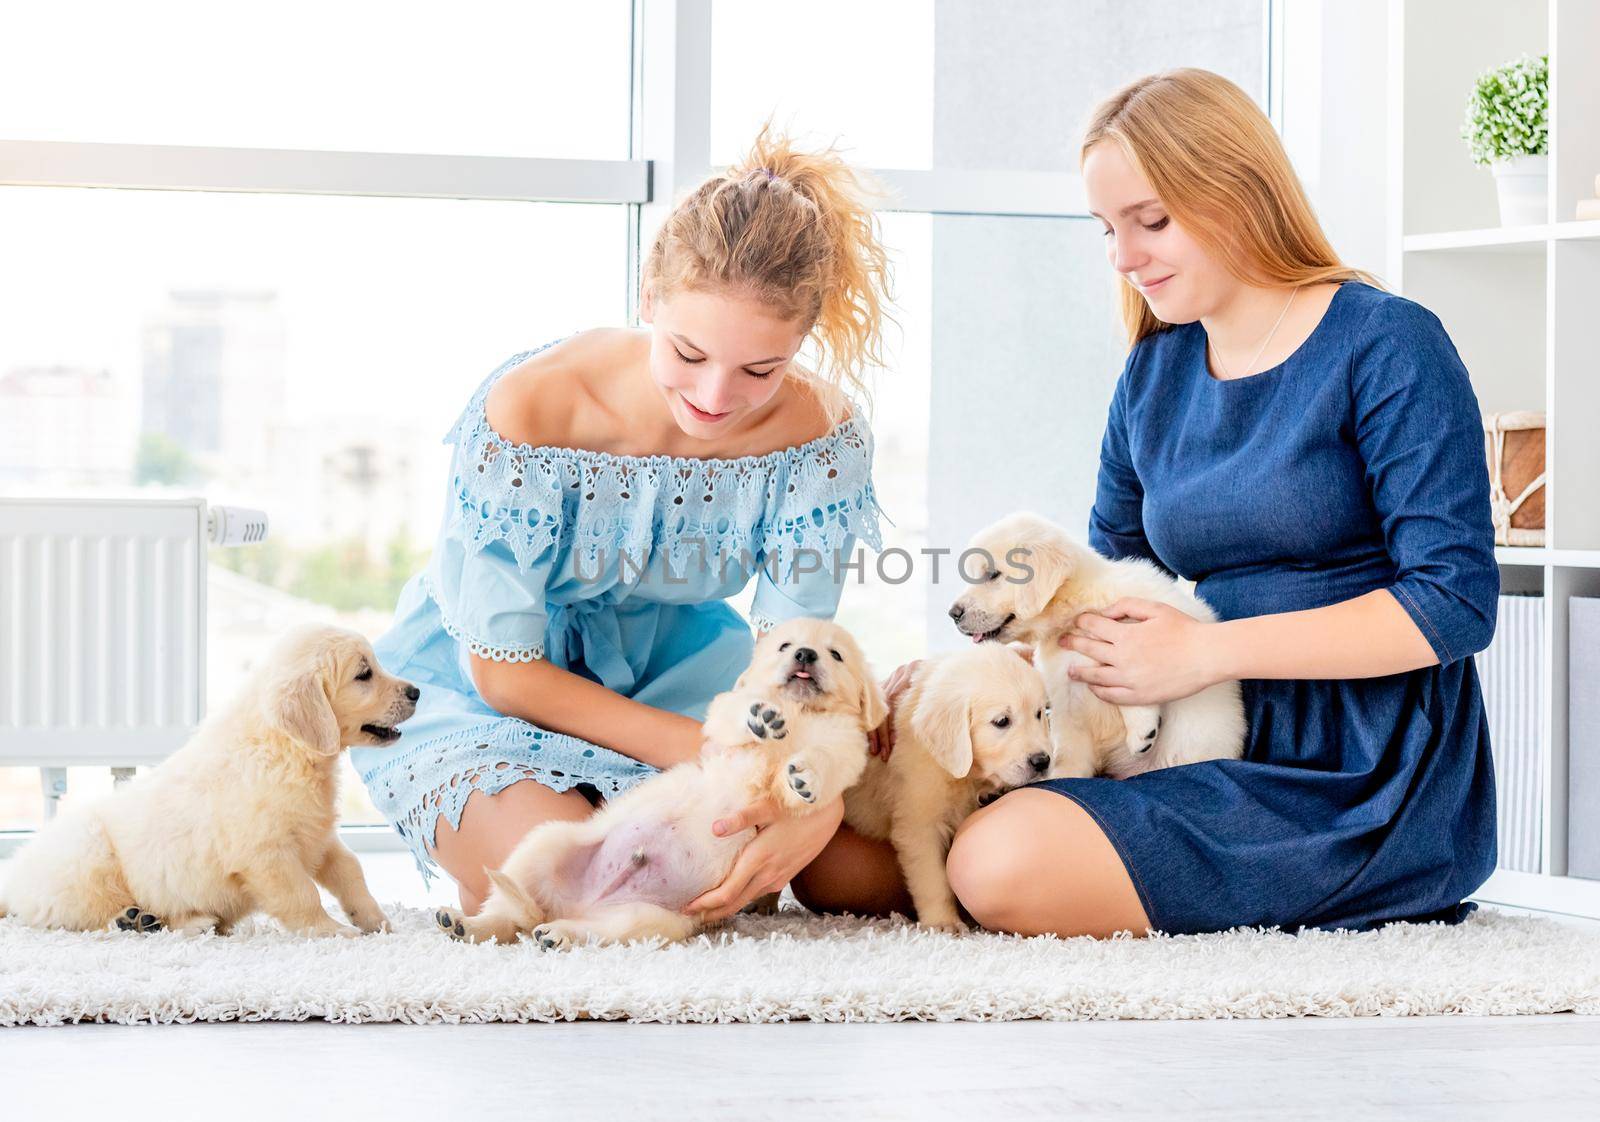 Girls play with retriever puppies by tan4ikk1